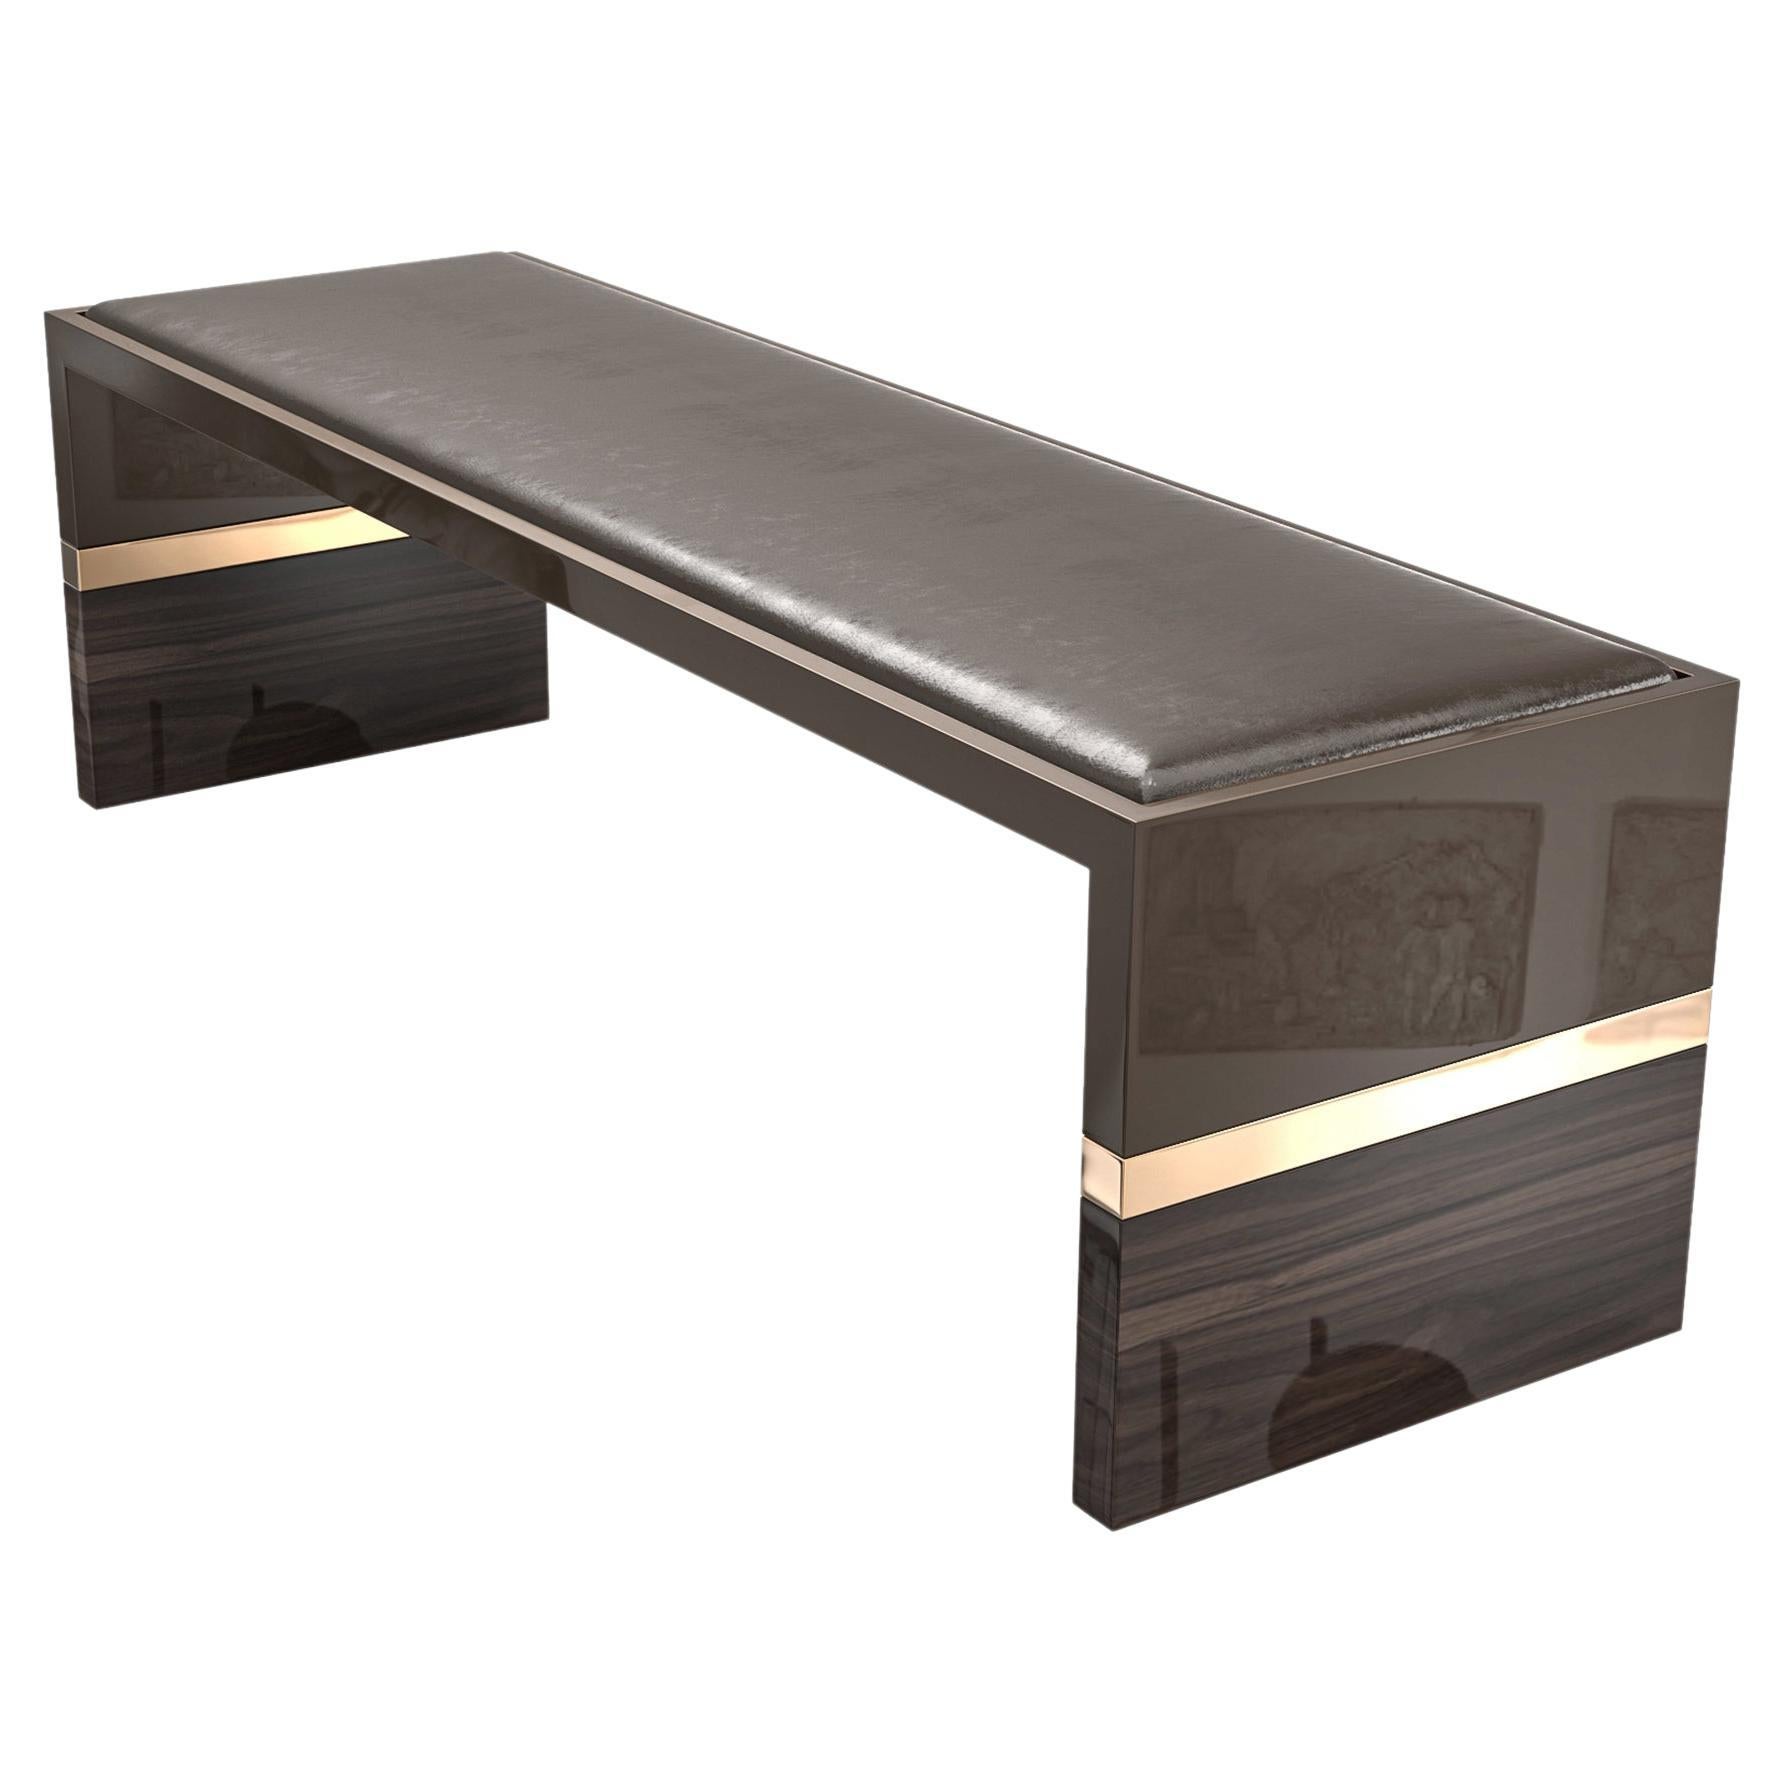 "Galeone" Bench with Stainless Steel, Walnut and Bronze Details, Istanbul